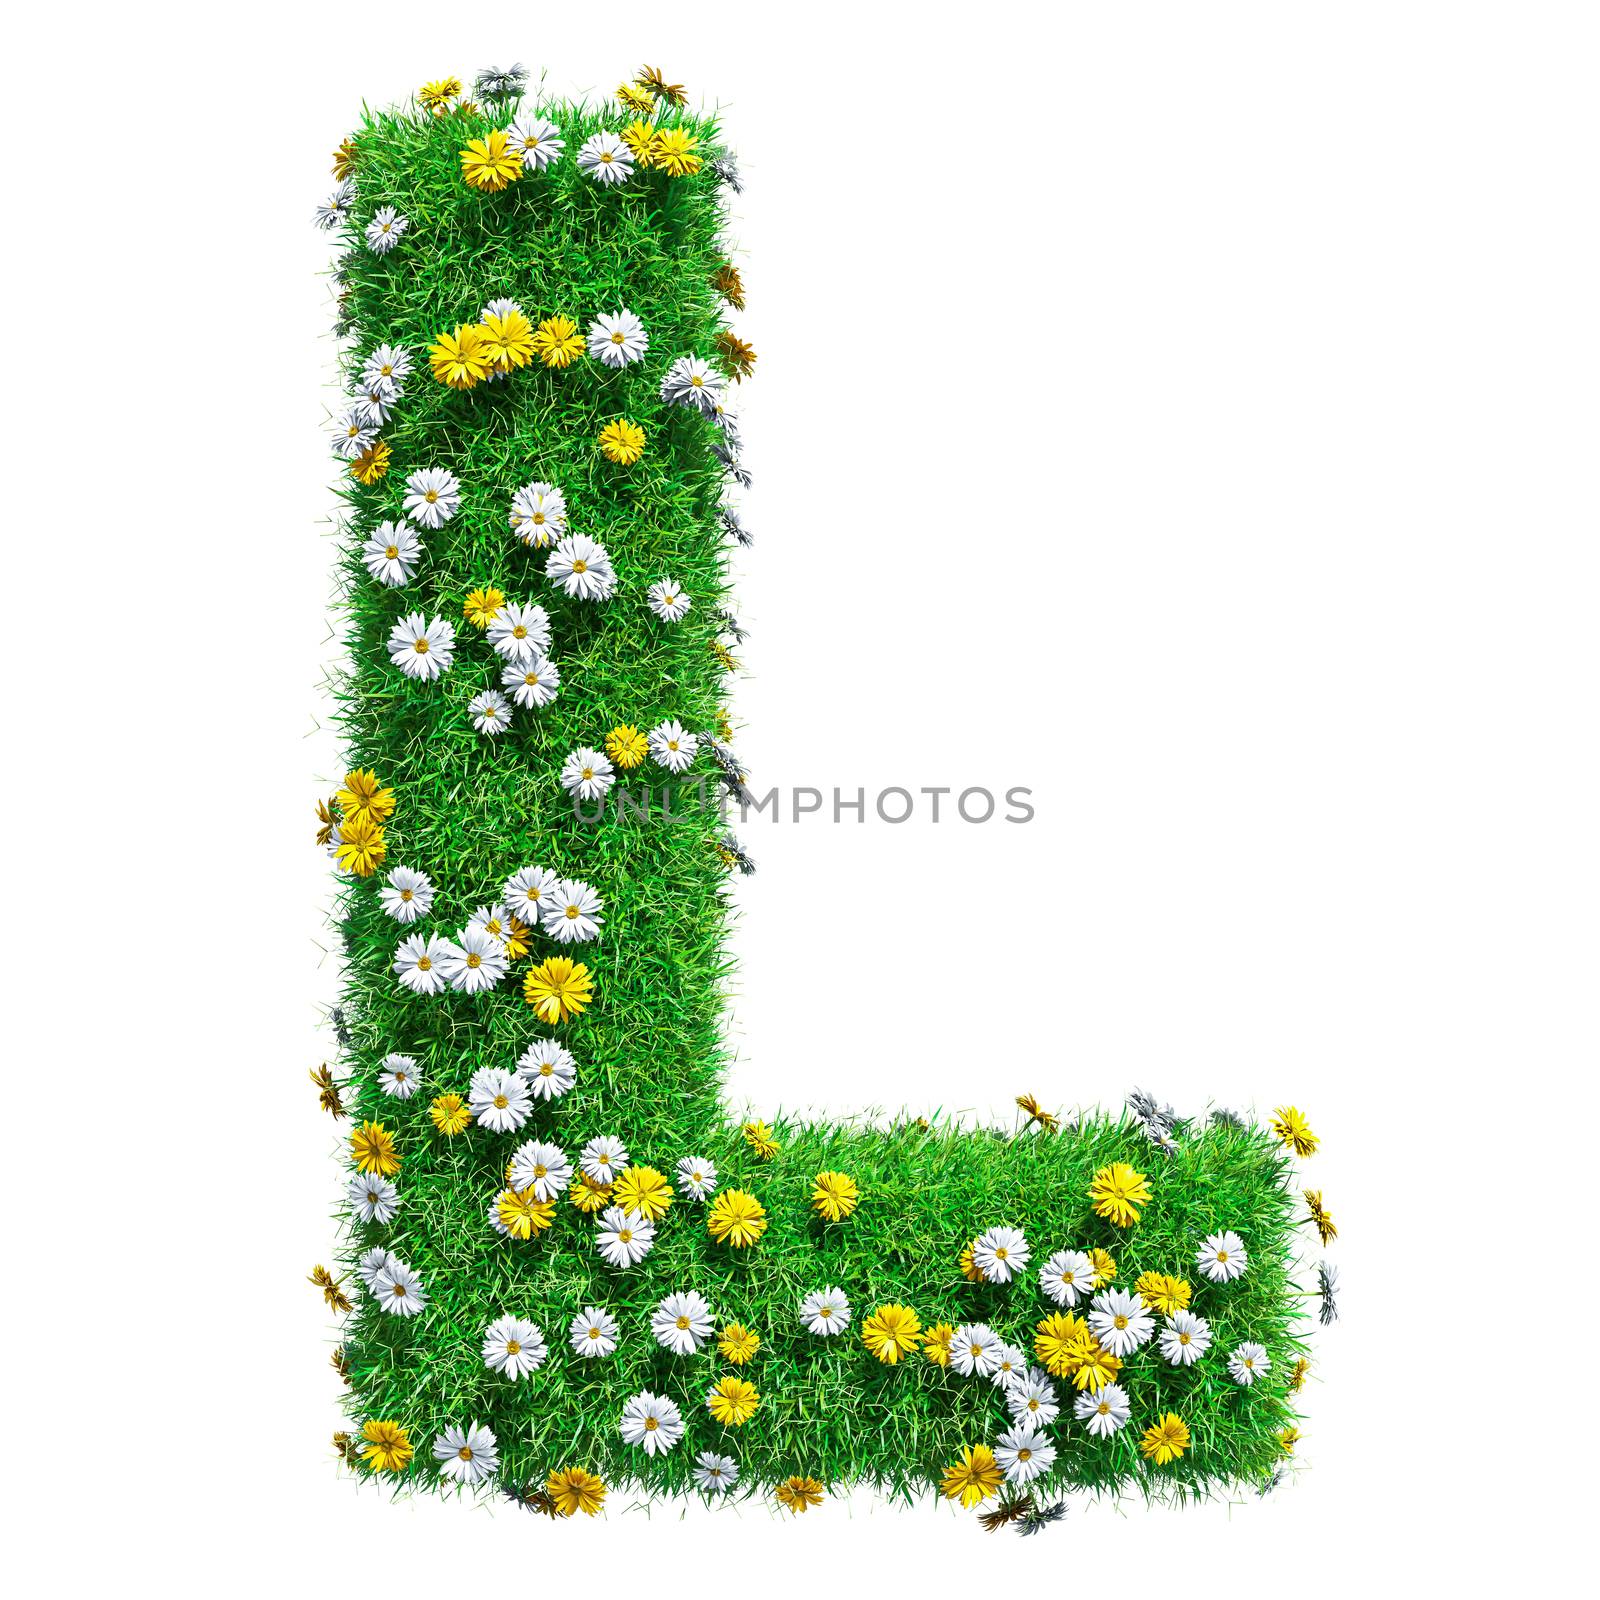 Letter L Of Green Grass And Flowers by cherezoff